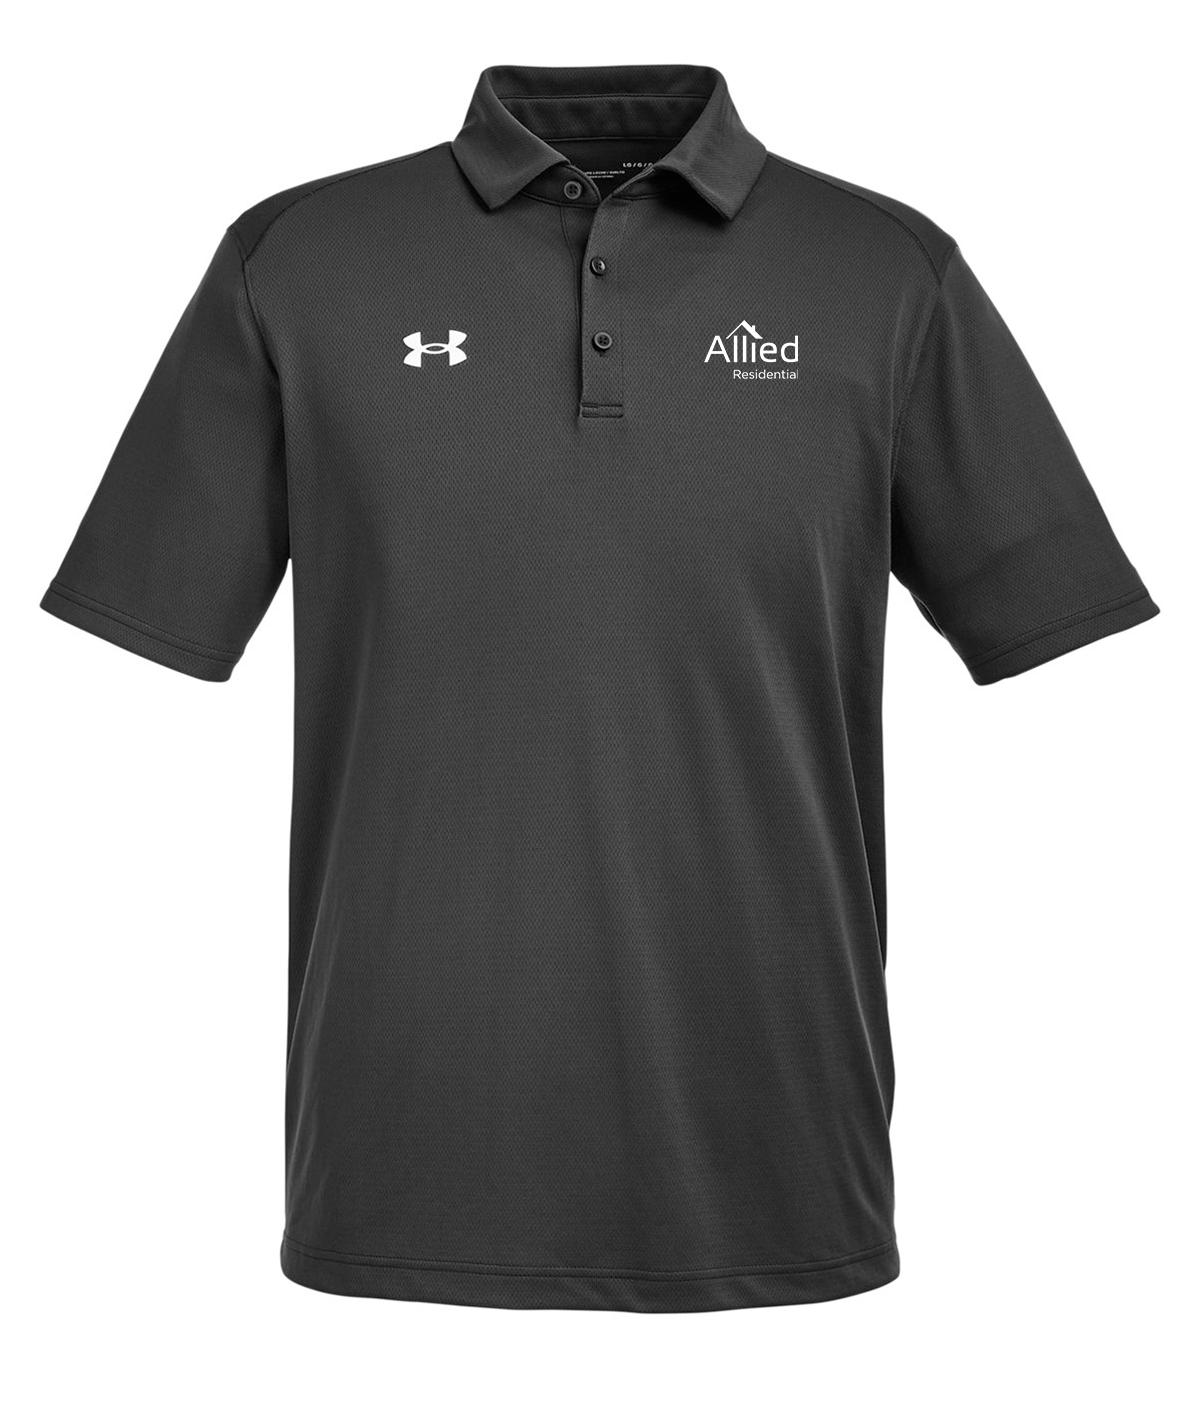 Under Armour Men's Tech Polo, Black [Allied Residential]